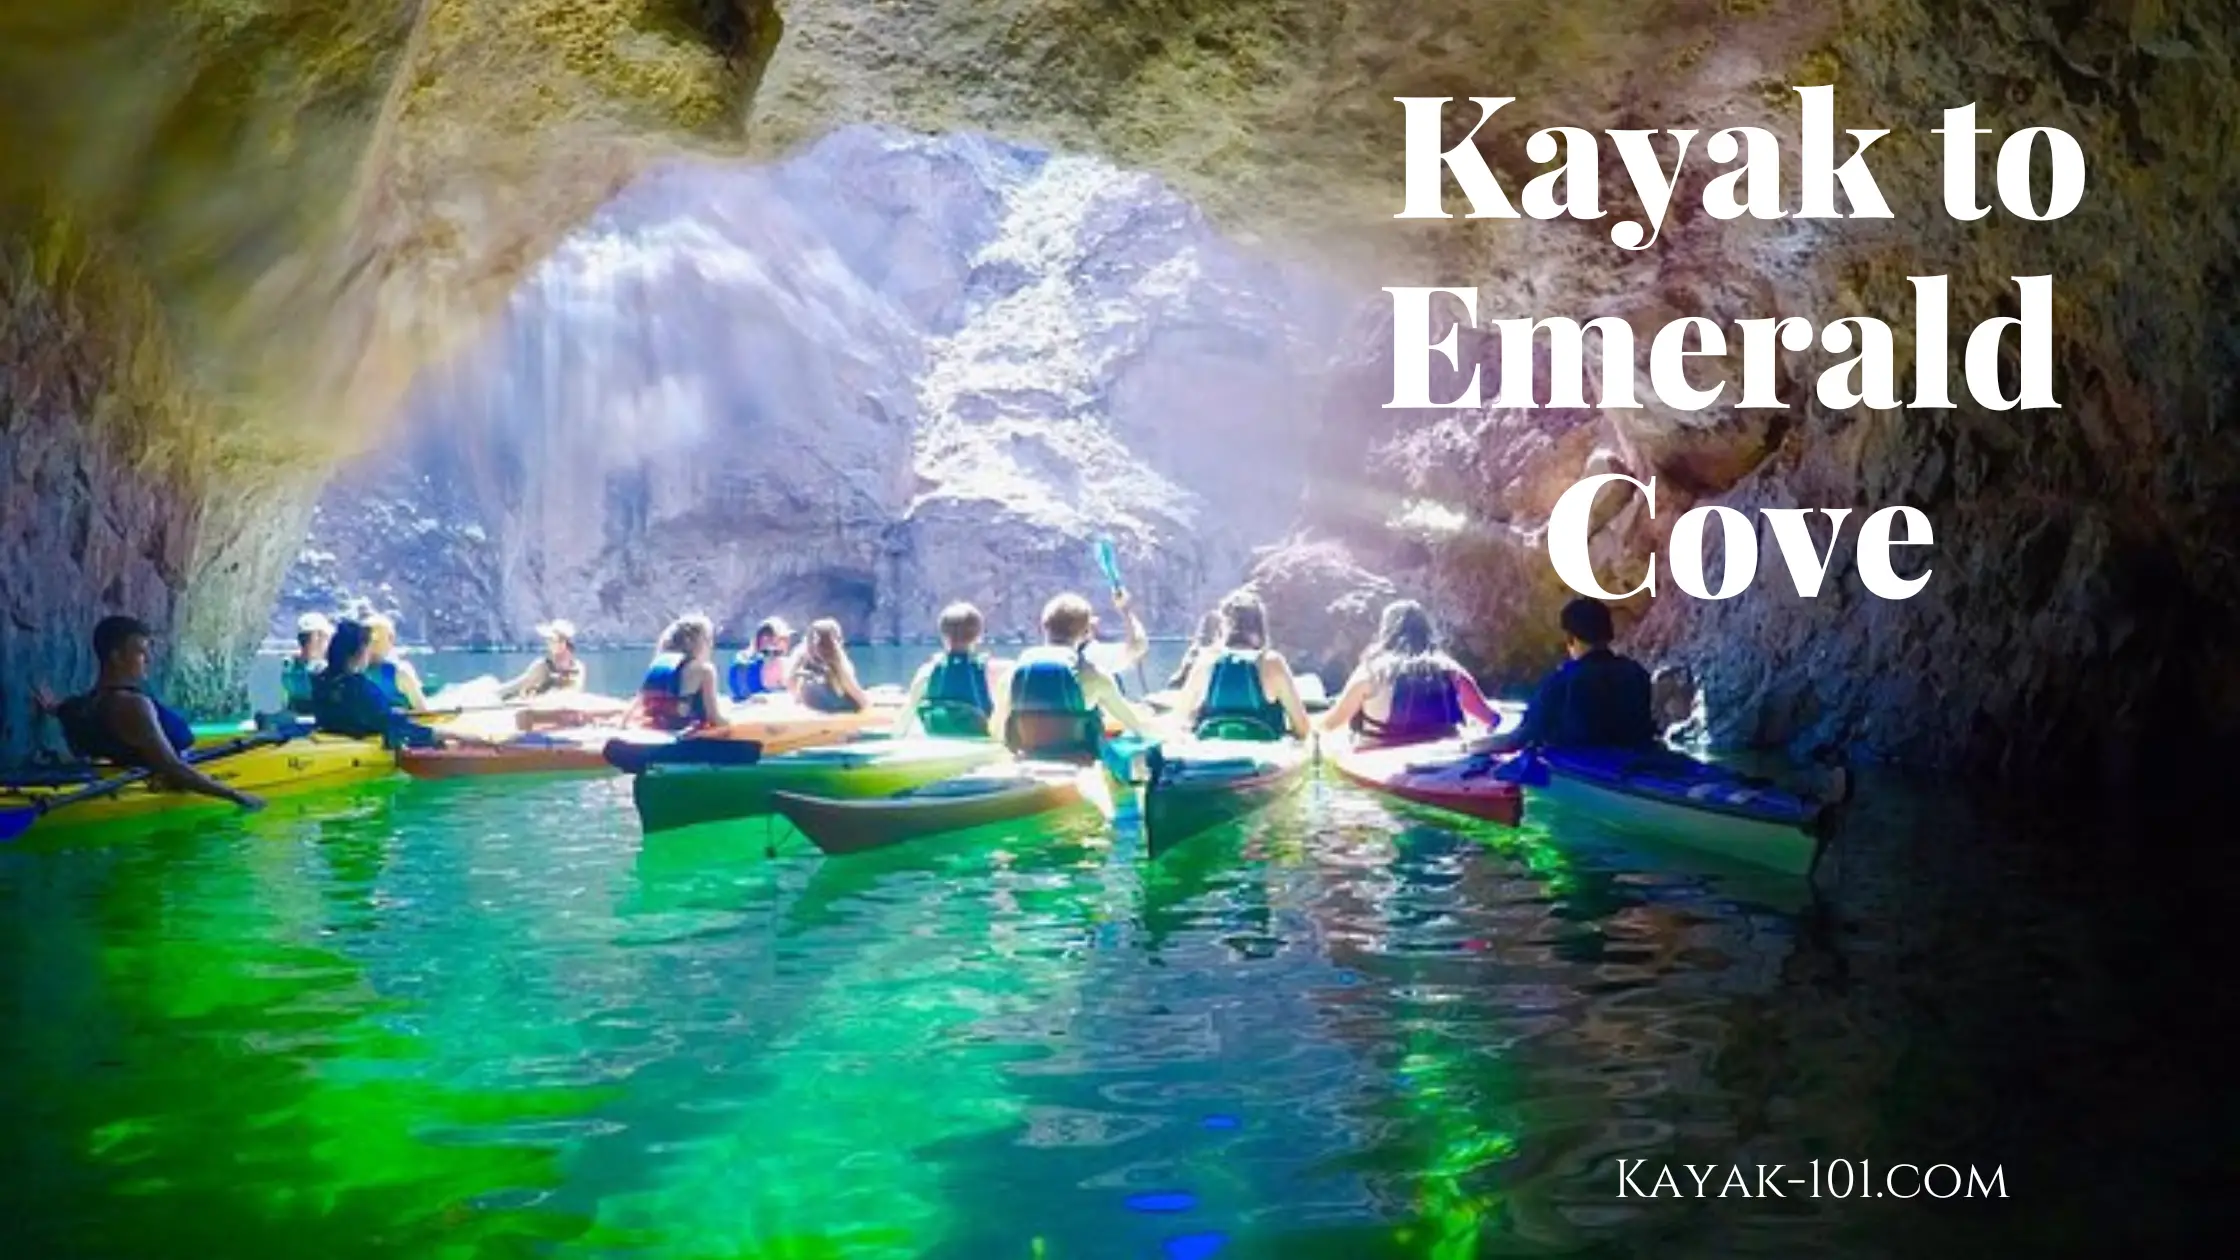 How to kayak to Emerald Cove